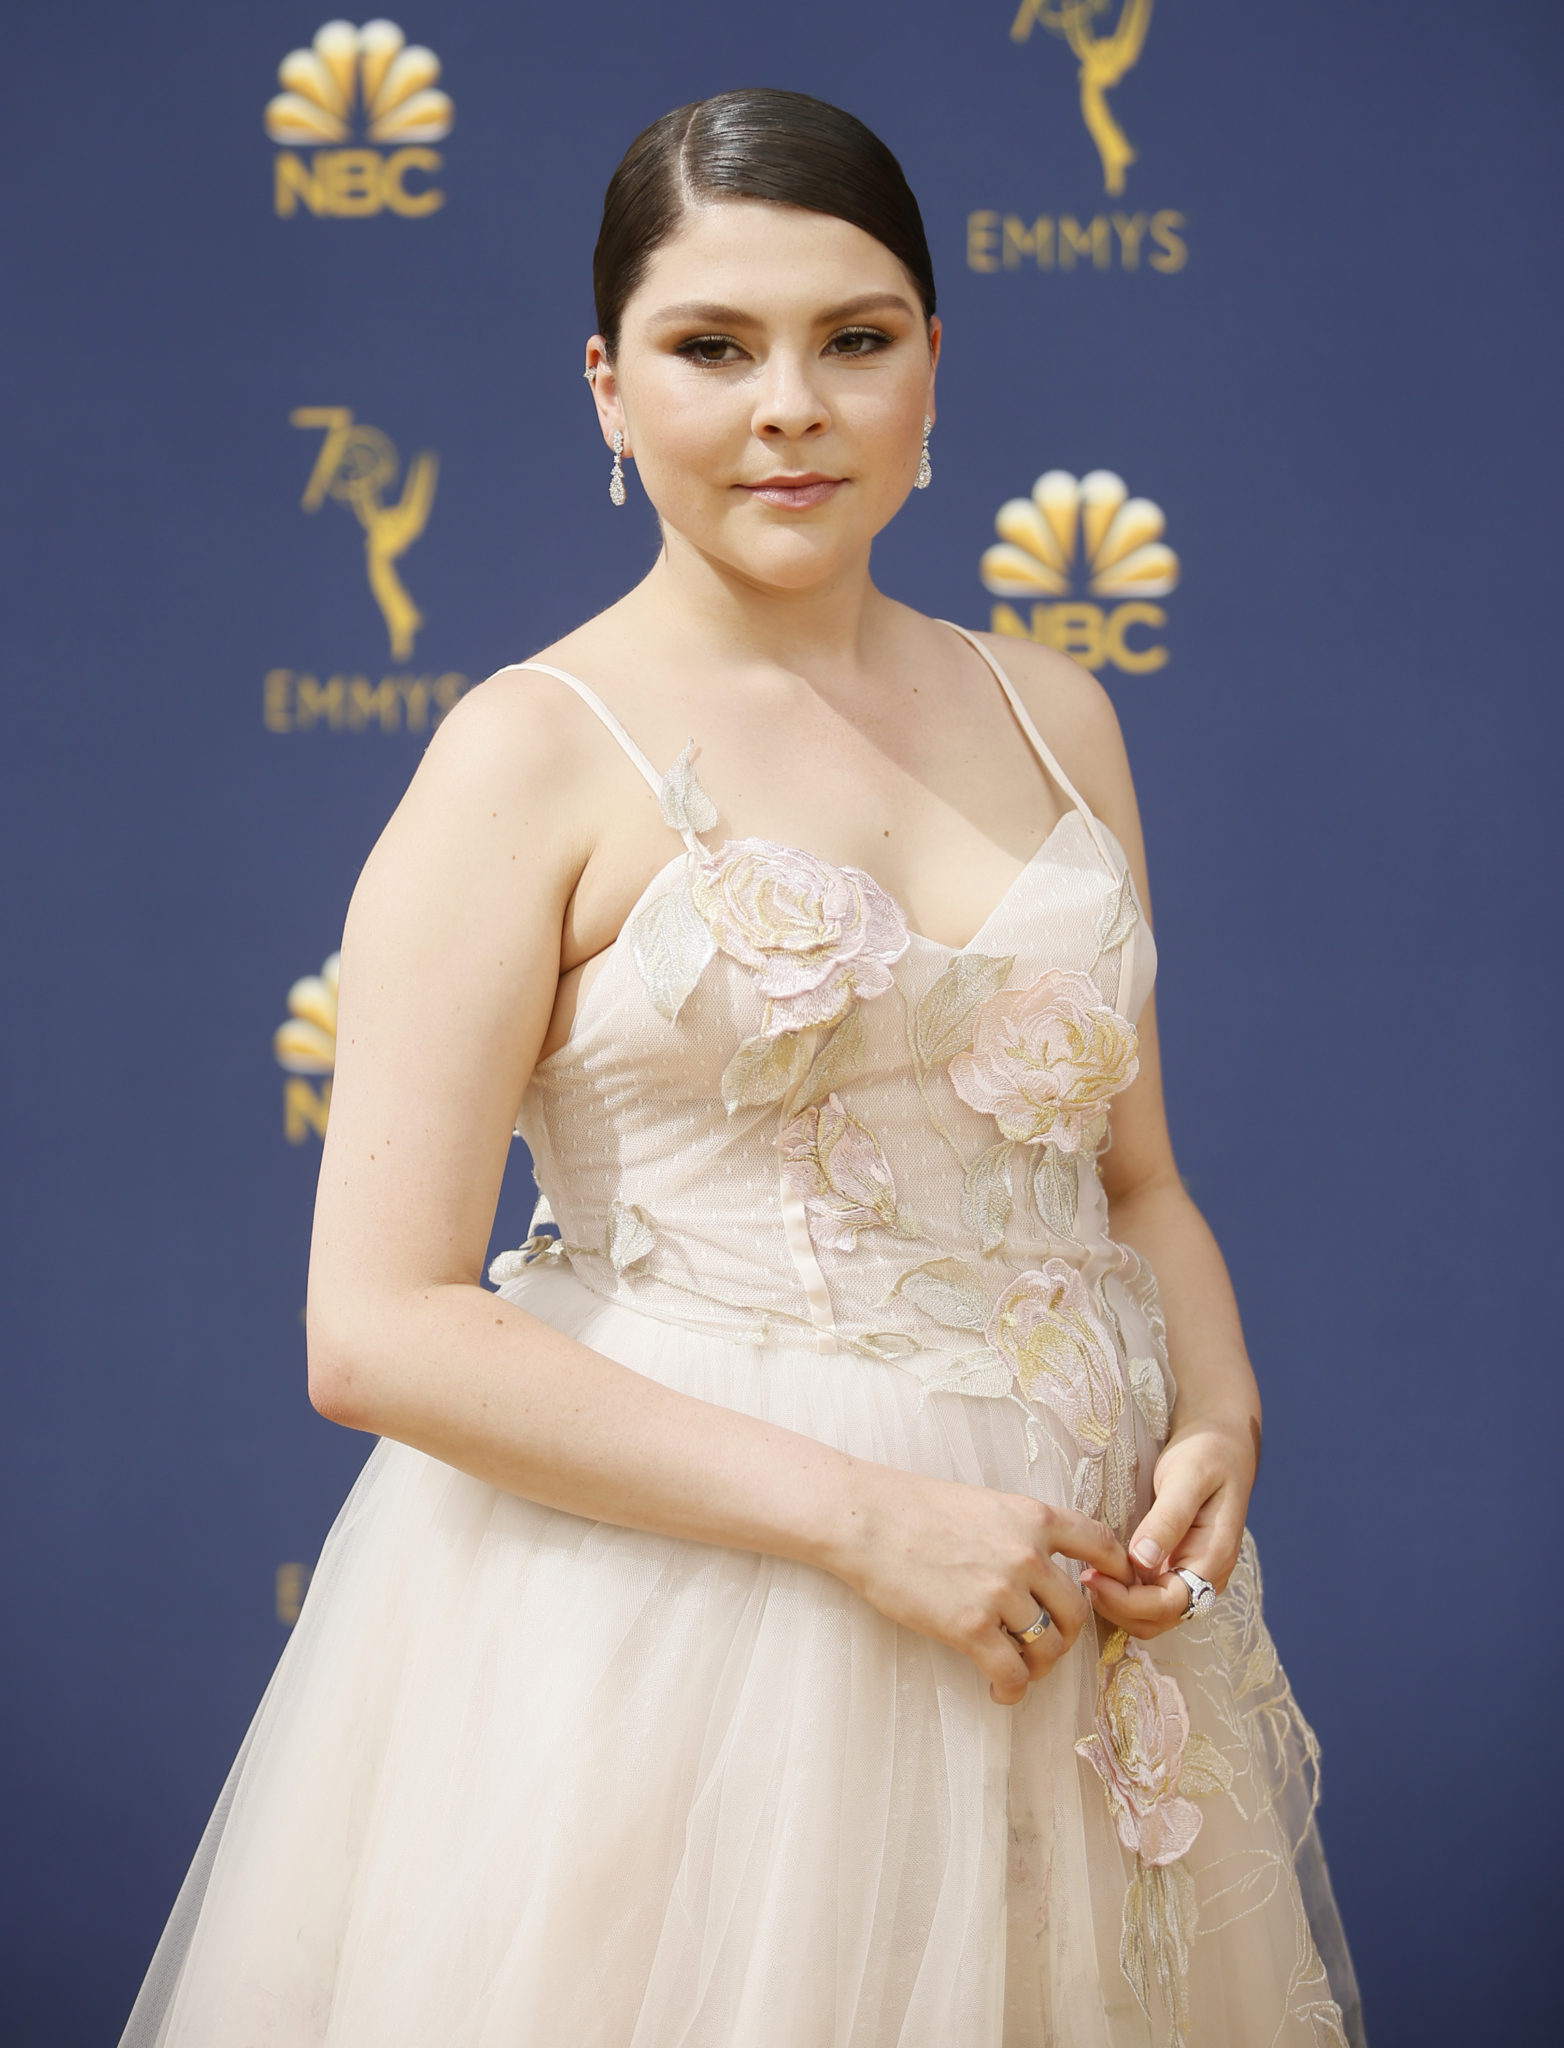 Hannah Zeile Emmys 4Chion Lifestyle